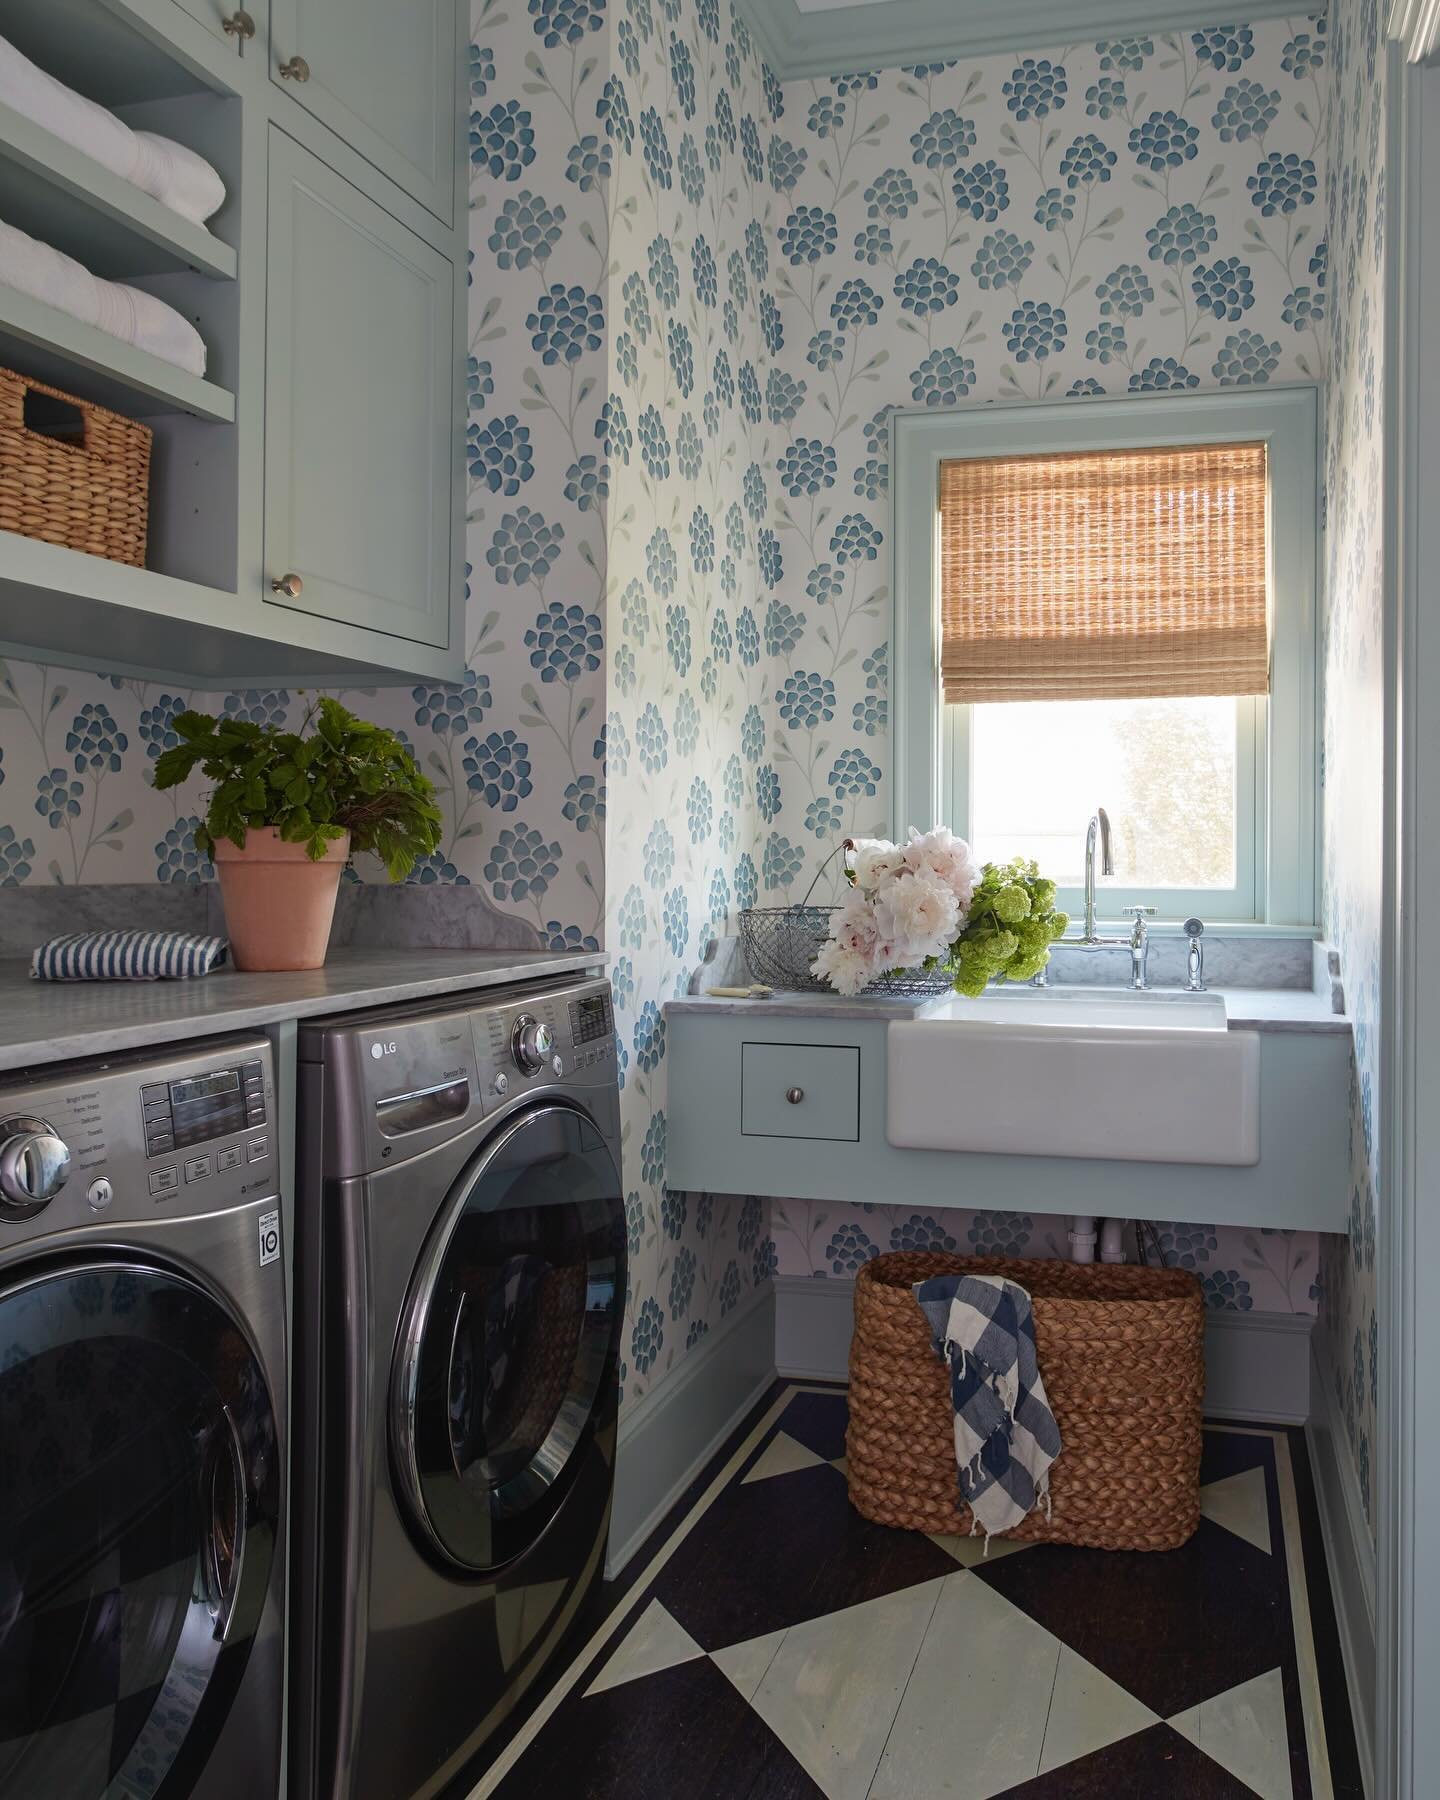 This adorable laundry room.  I don't think I'd let all the heaps of kids clothing build up in here 🤣🤣🤣. Who's with me!?